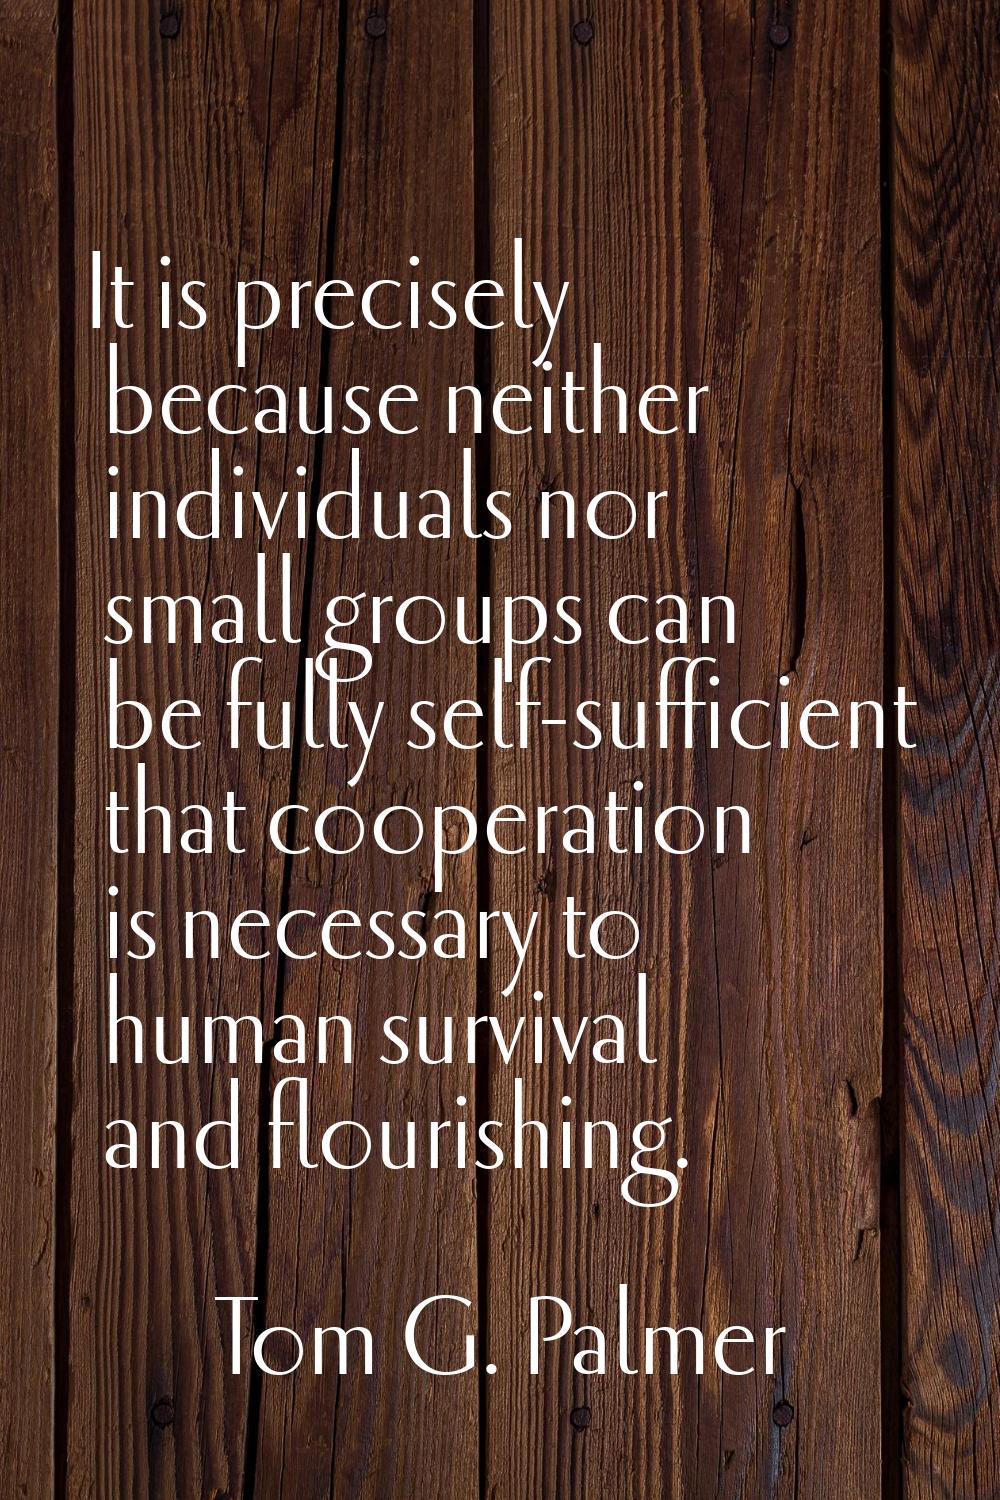 It is precisely because neither individuals nor small groups can be fully self-sufficient that coop